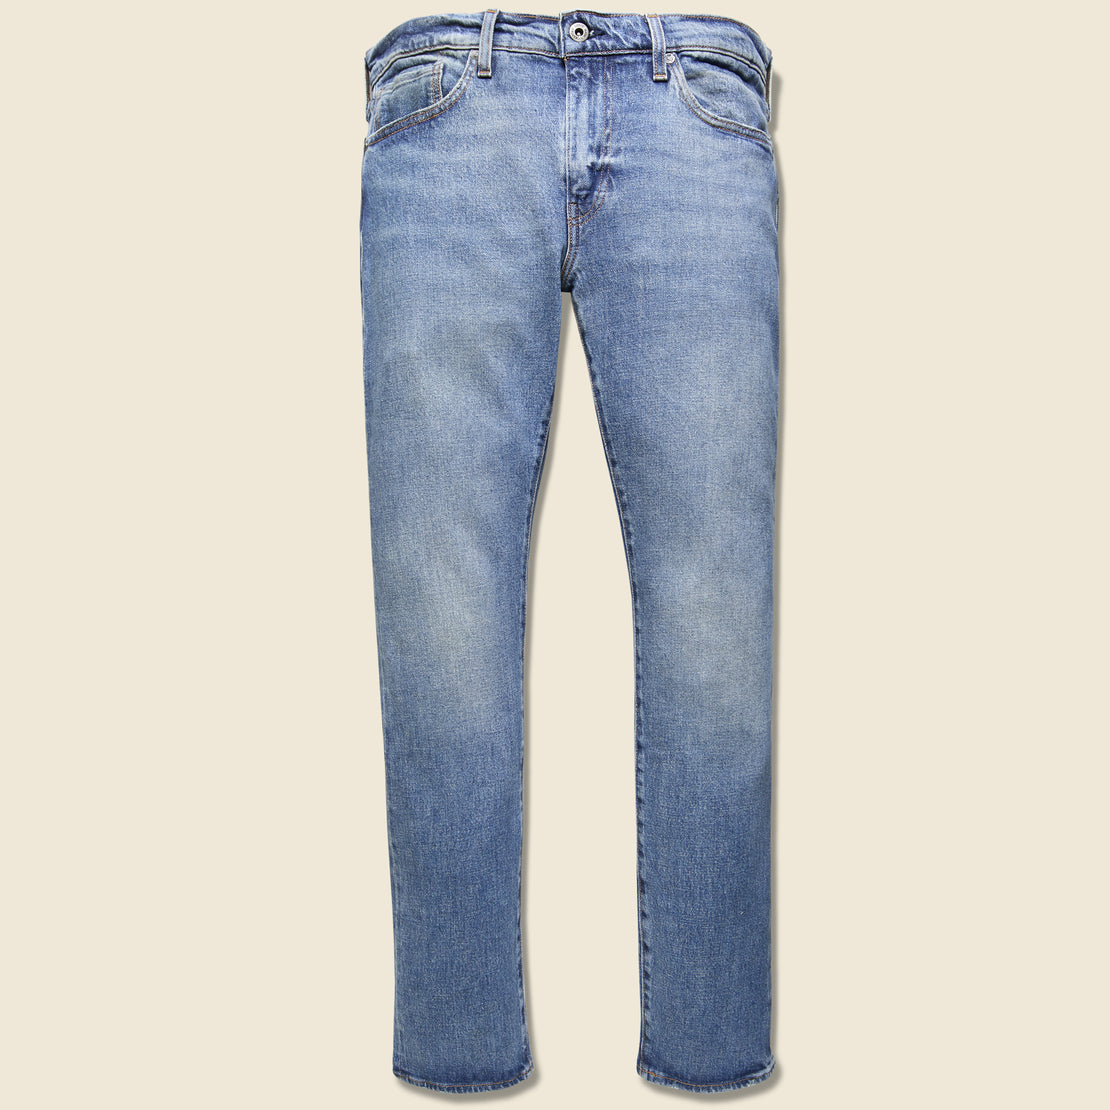 Levis Made & Crafted 511 Jean - Houston